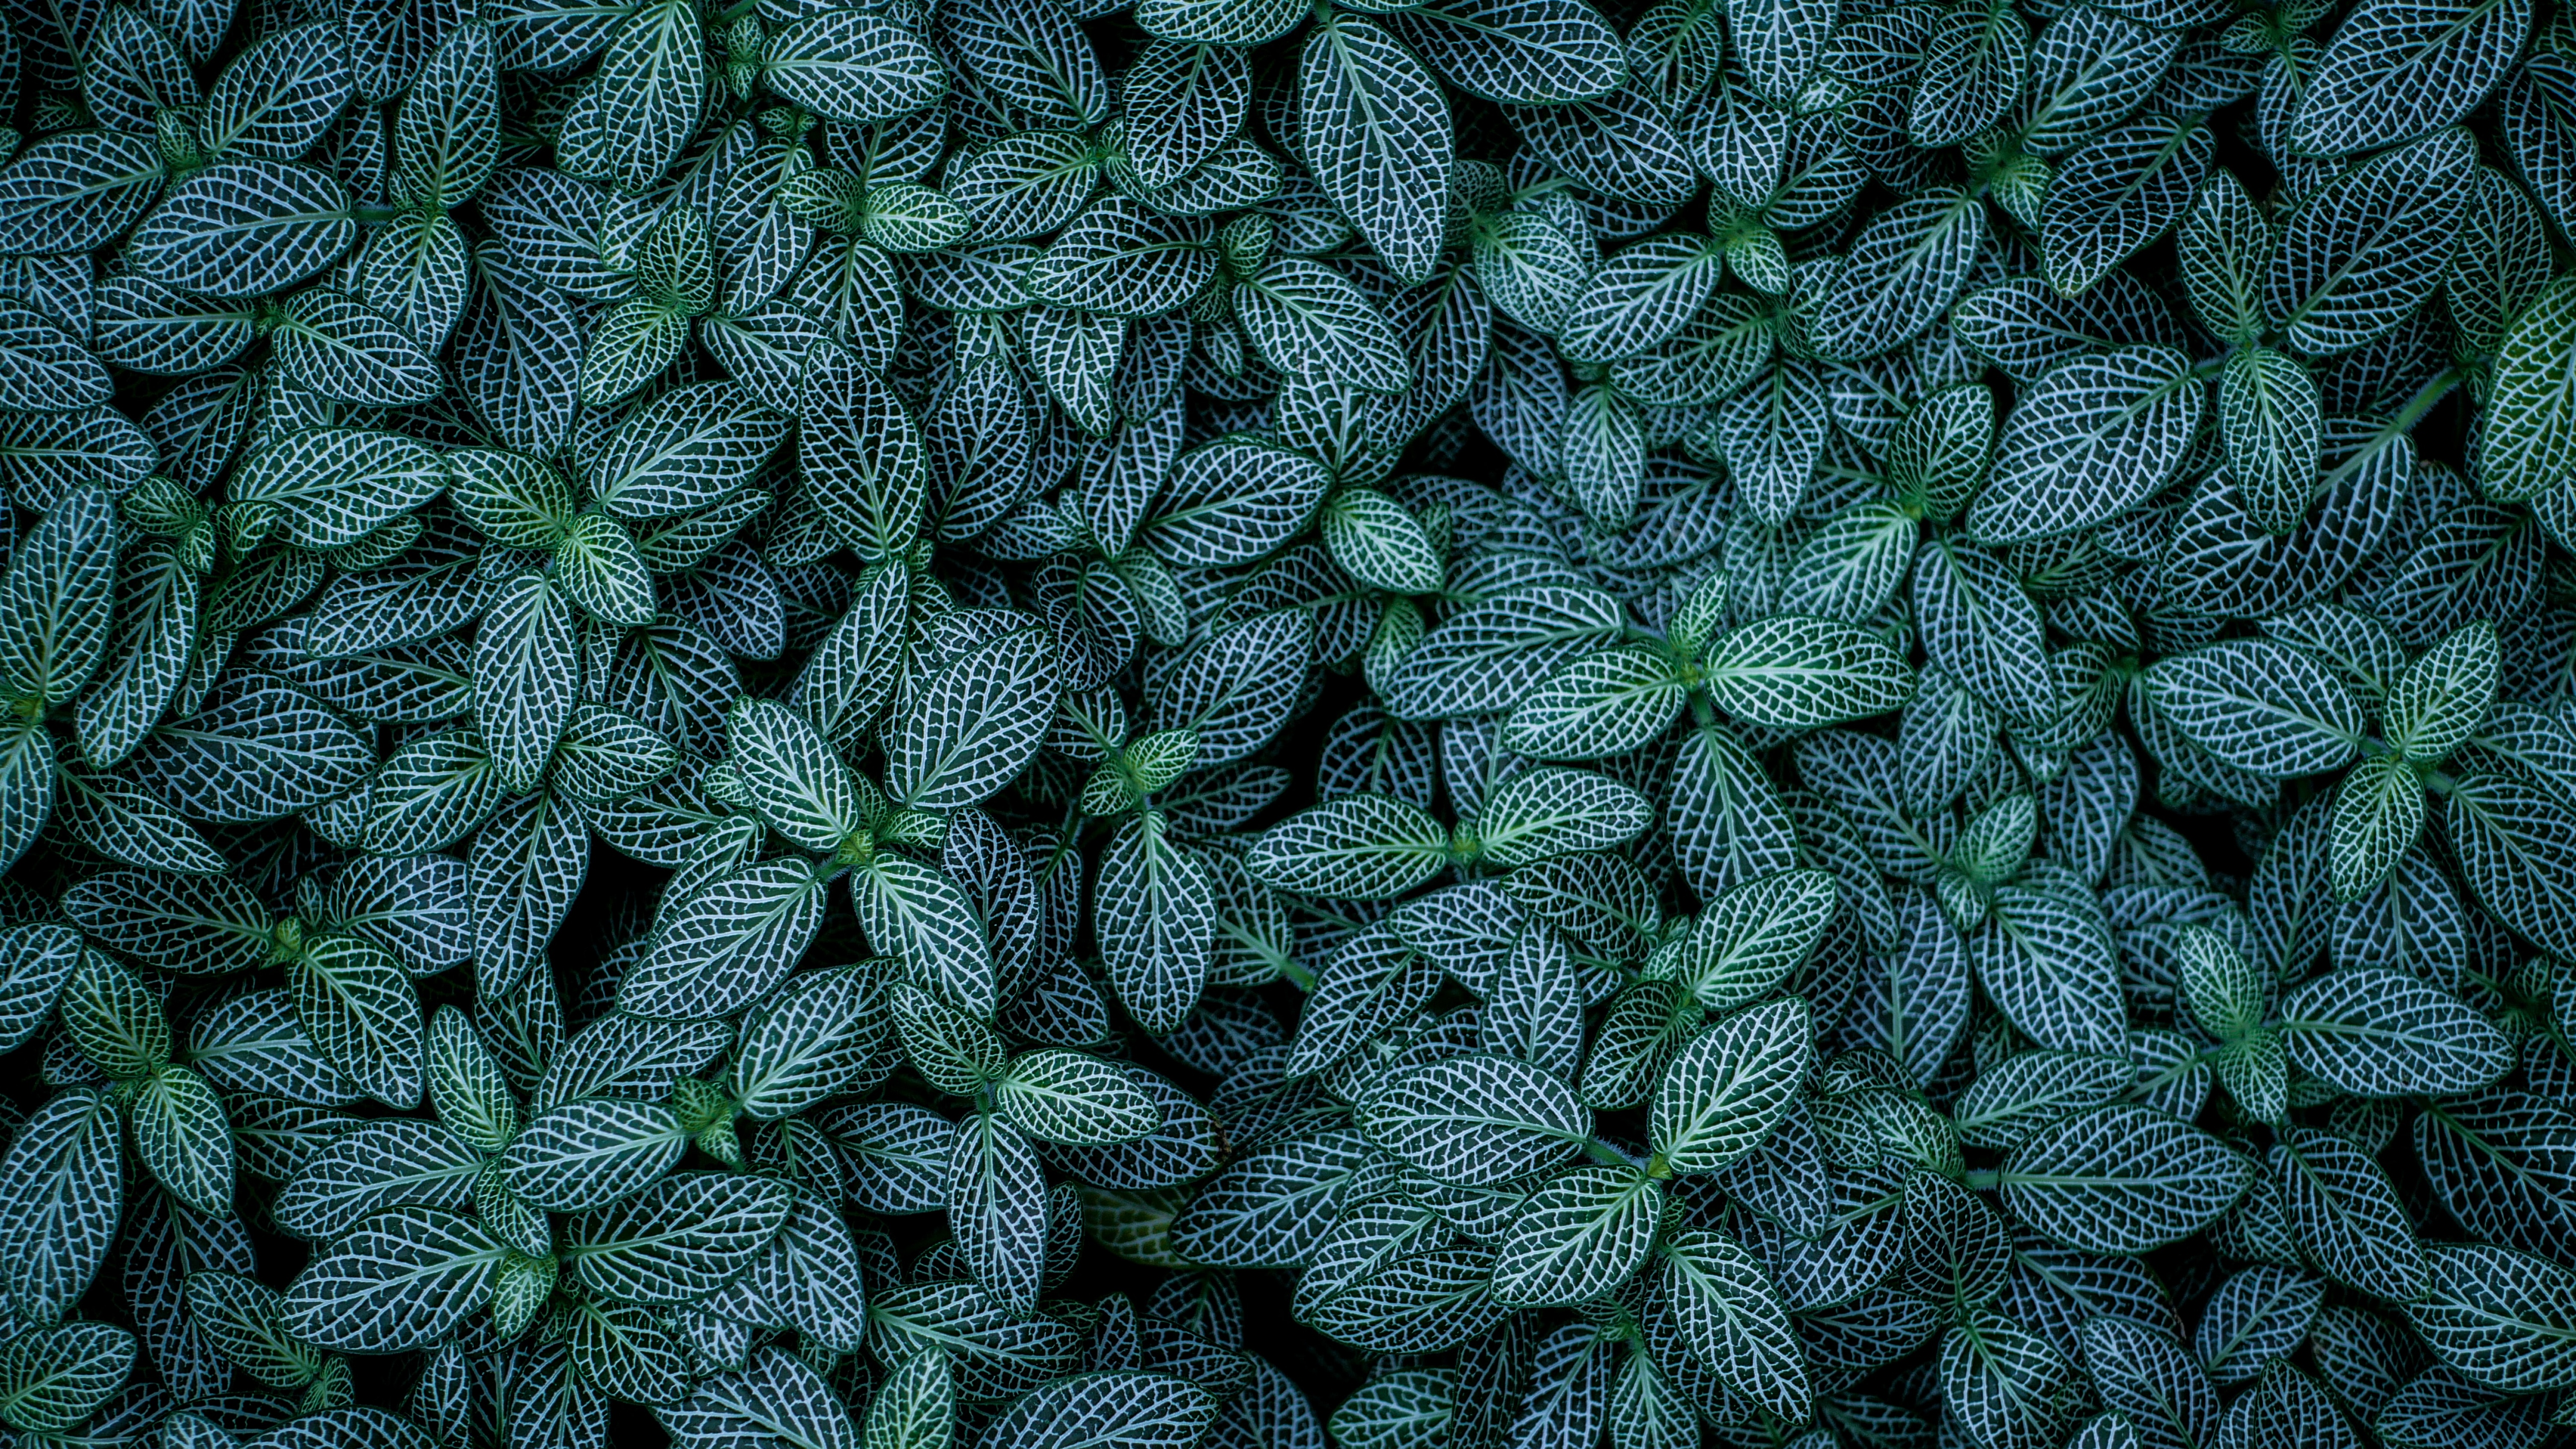 Plant Background Photos Download The BEST Free Plant Background Stock  Photos  HD Images